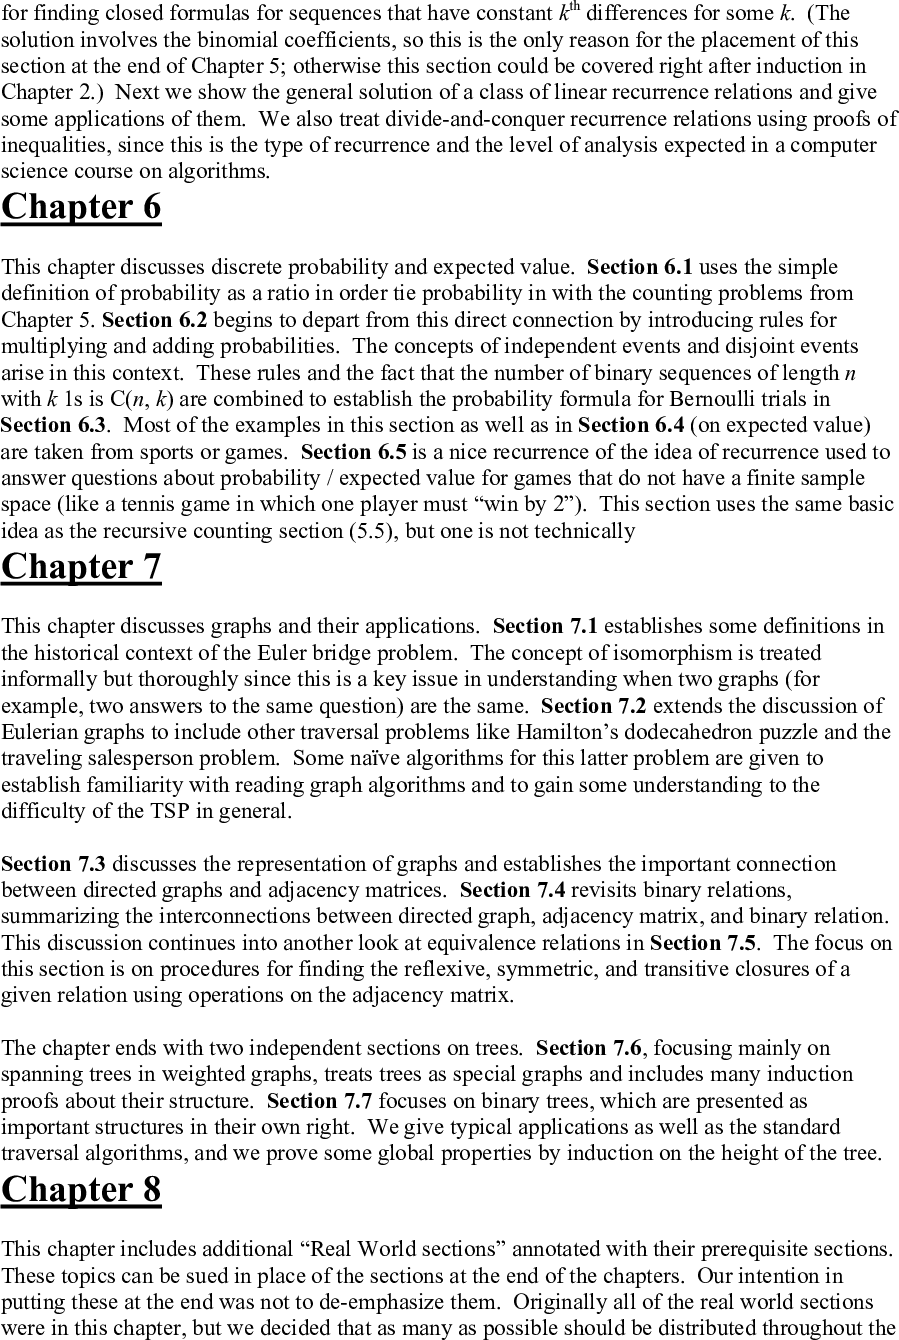 Page 7 of 7 - Section 1 Discrete Instructors Guide